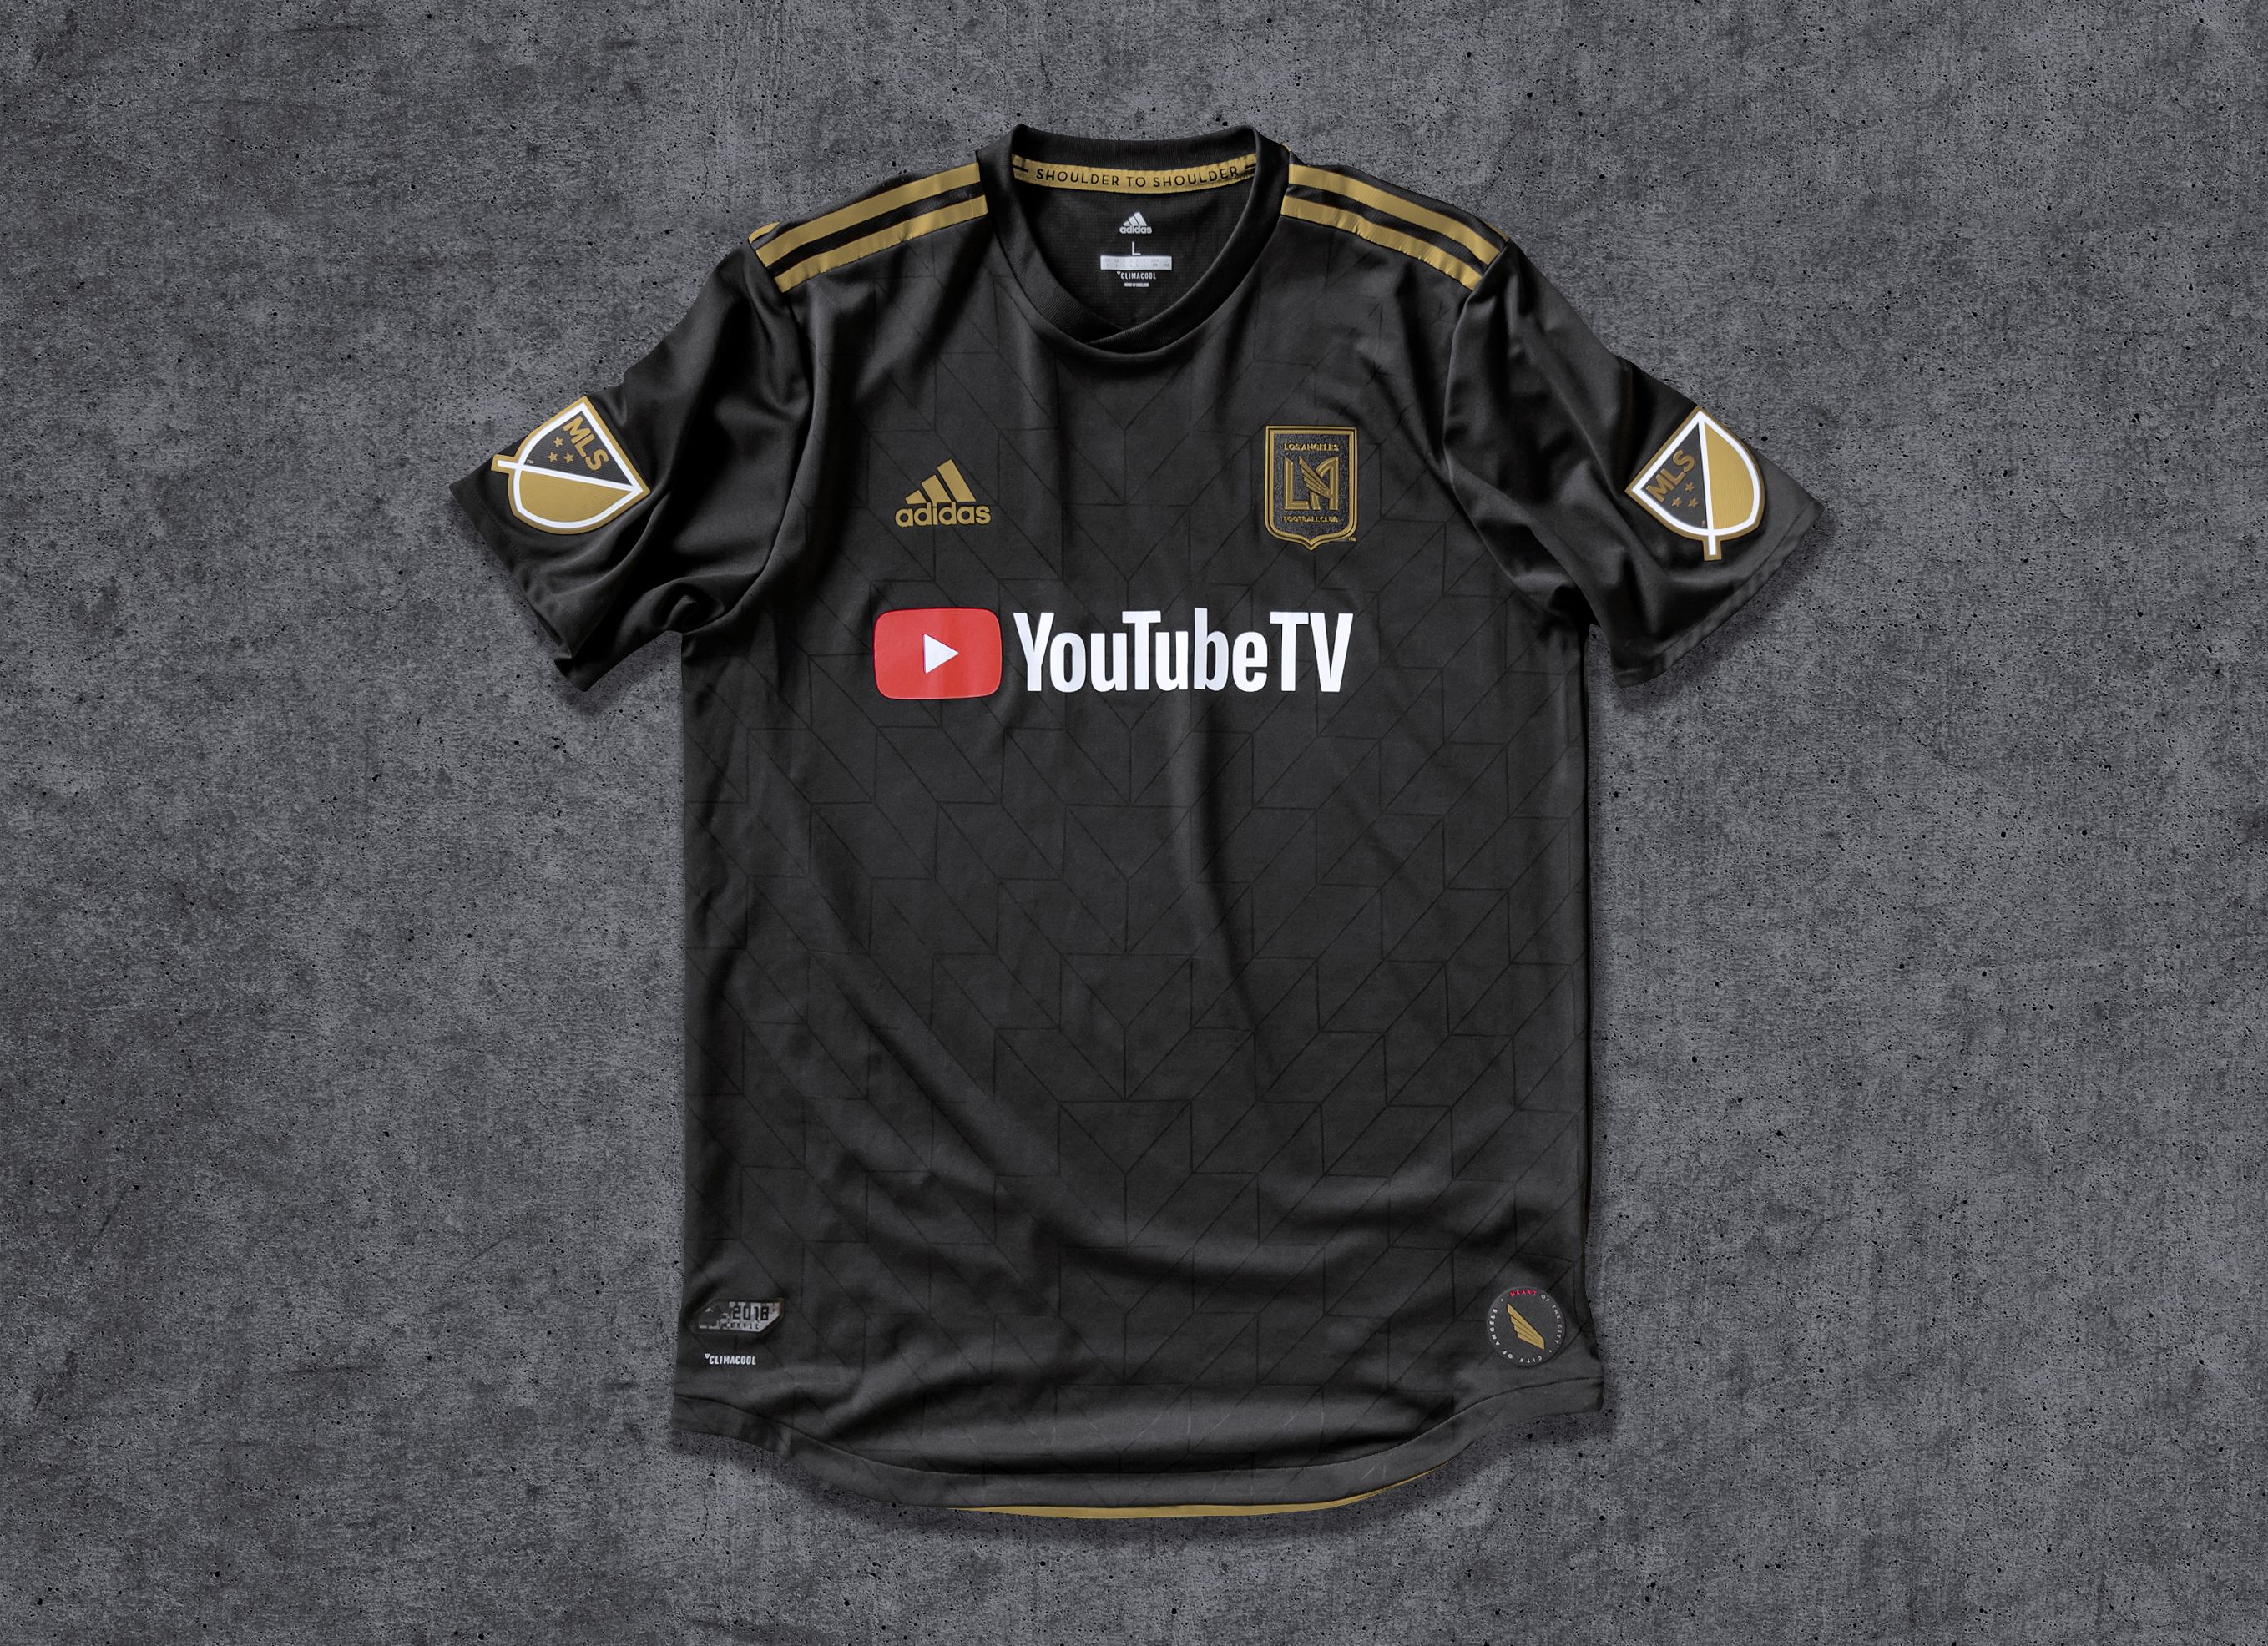 Lafc Galaxy Jersey for Sale in Downey, CA - OfferUp